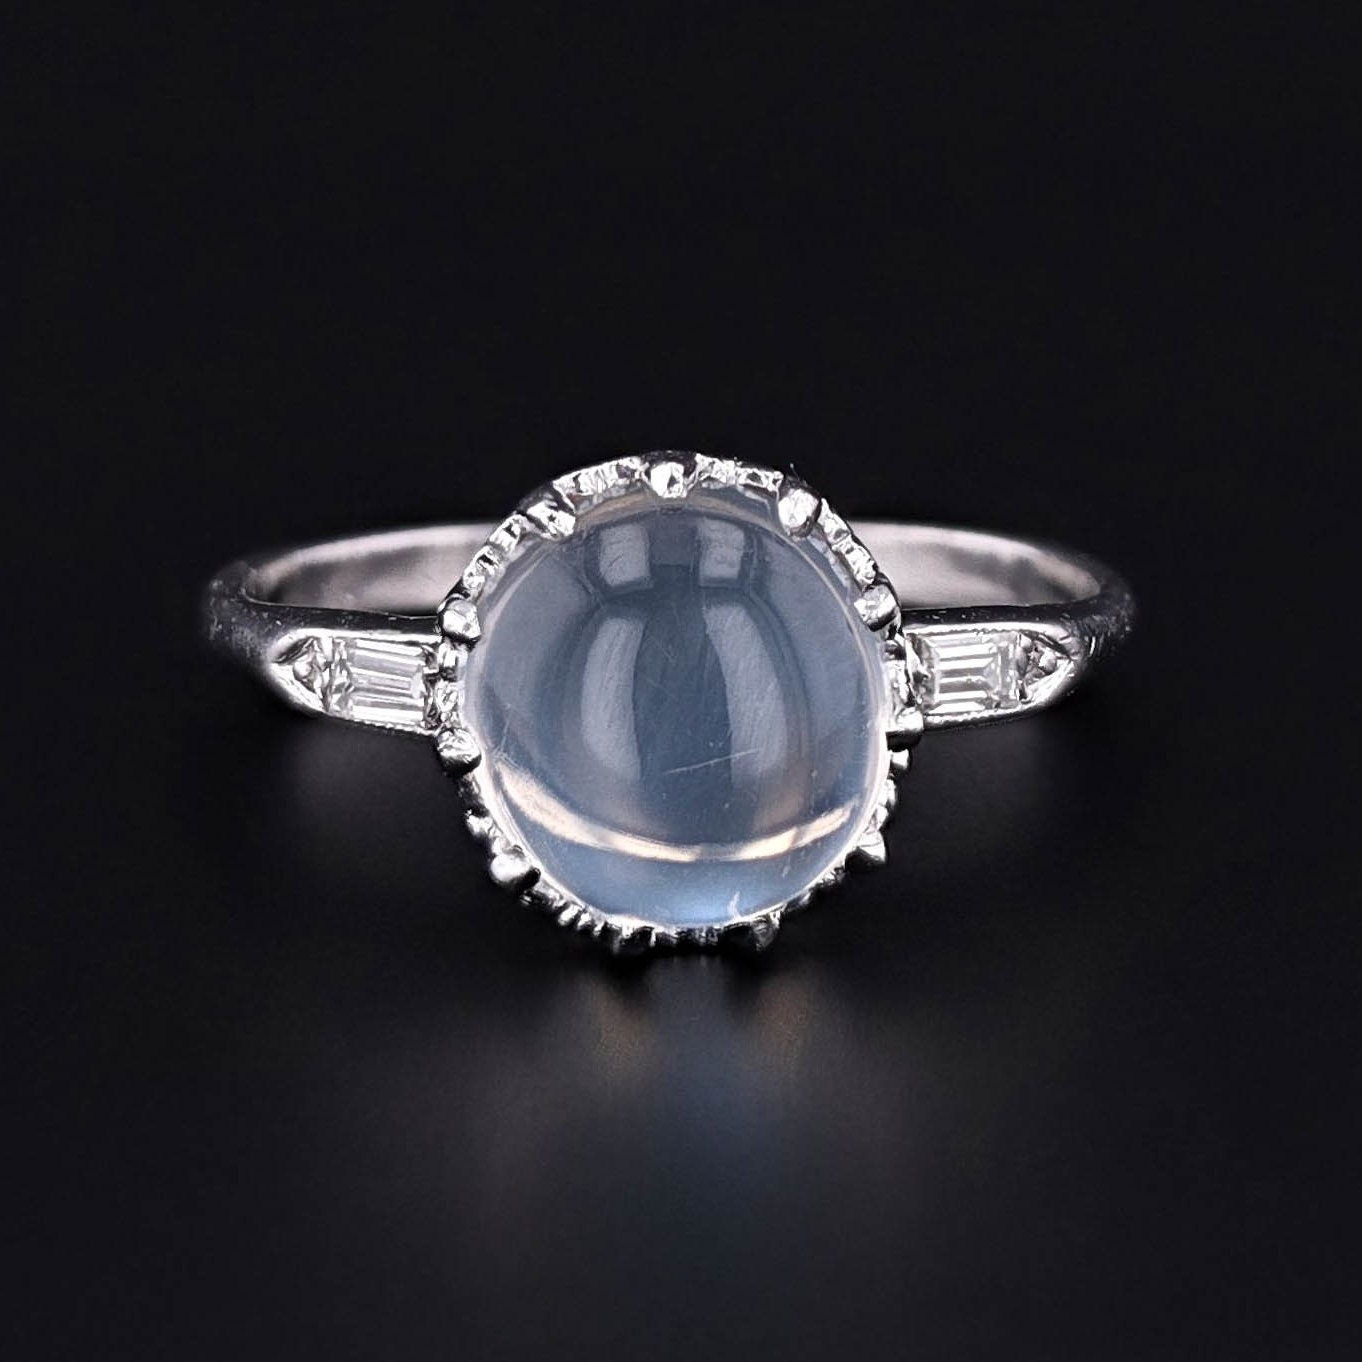 Vintage Moonstone and Diamond Ring of 14k White Gold